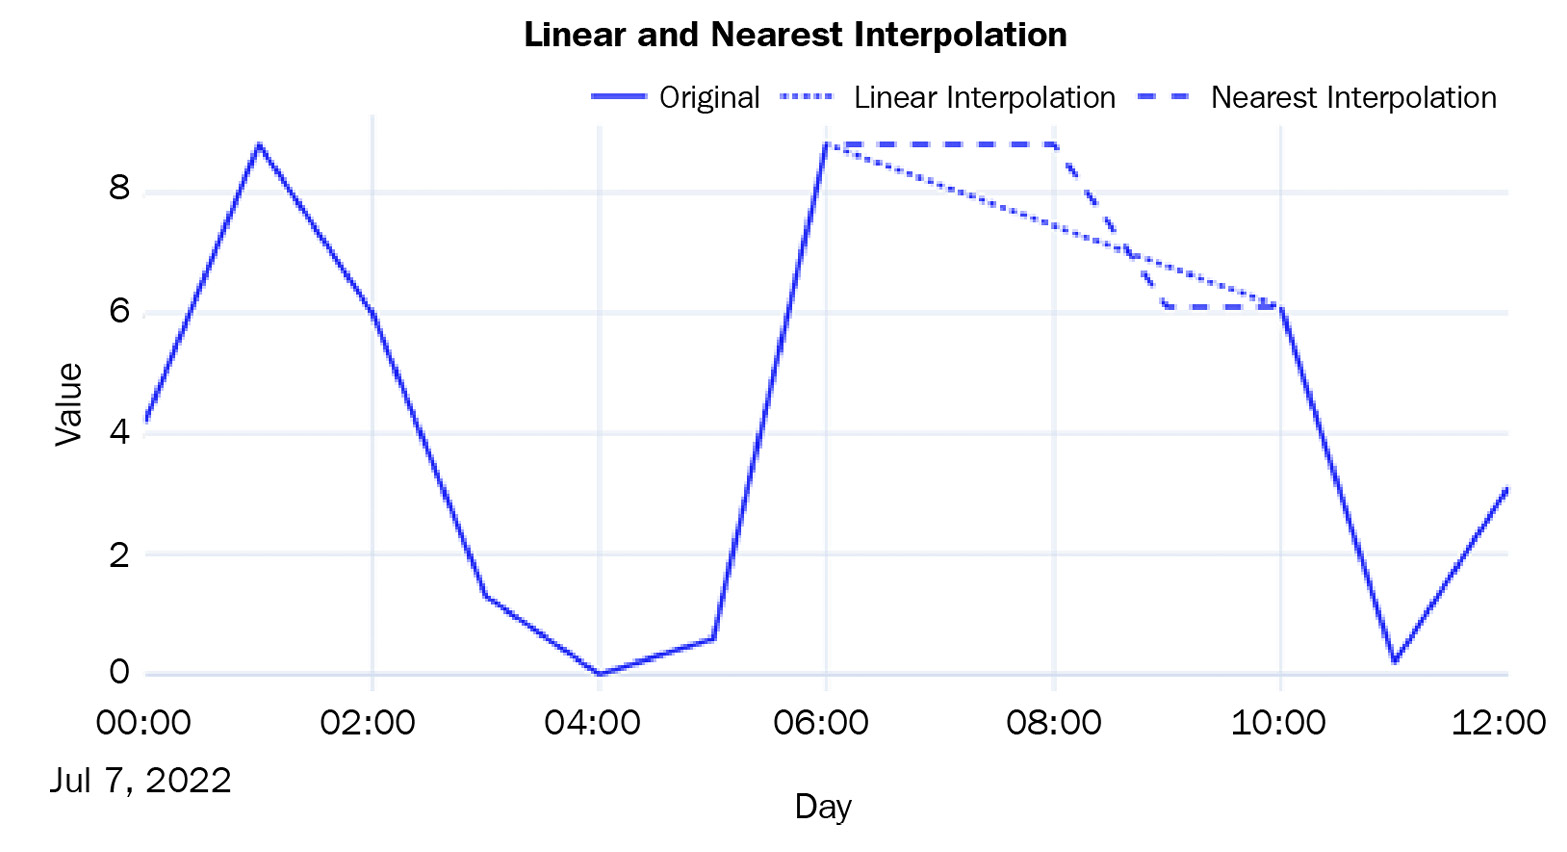 Figure 2.5 – Imputed missing values using linear and nearest interpolation
